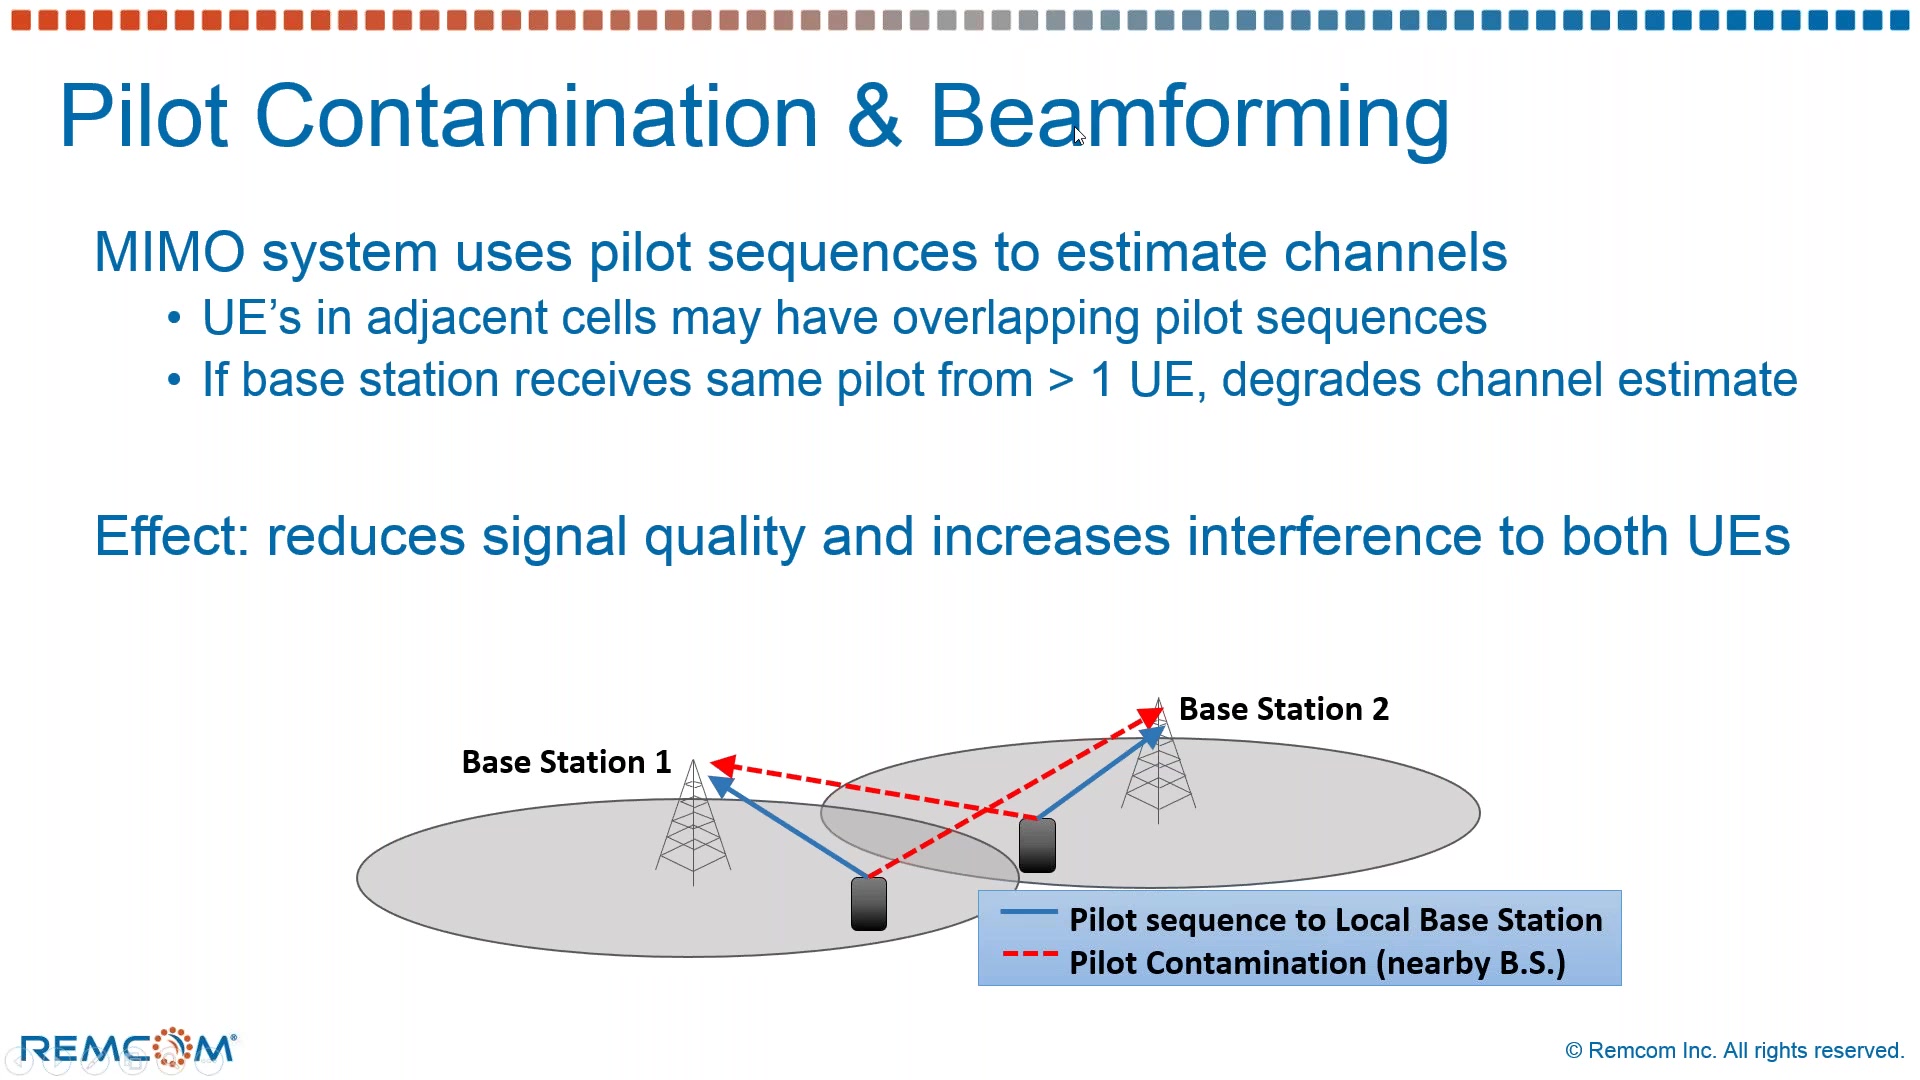 Using Wireless InSite MIMO to Visualize Beamforming in an Urban Environment  — Remcom